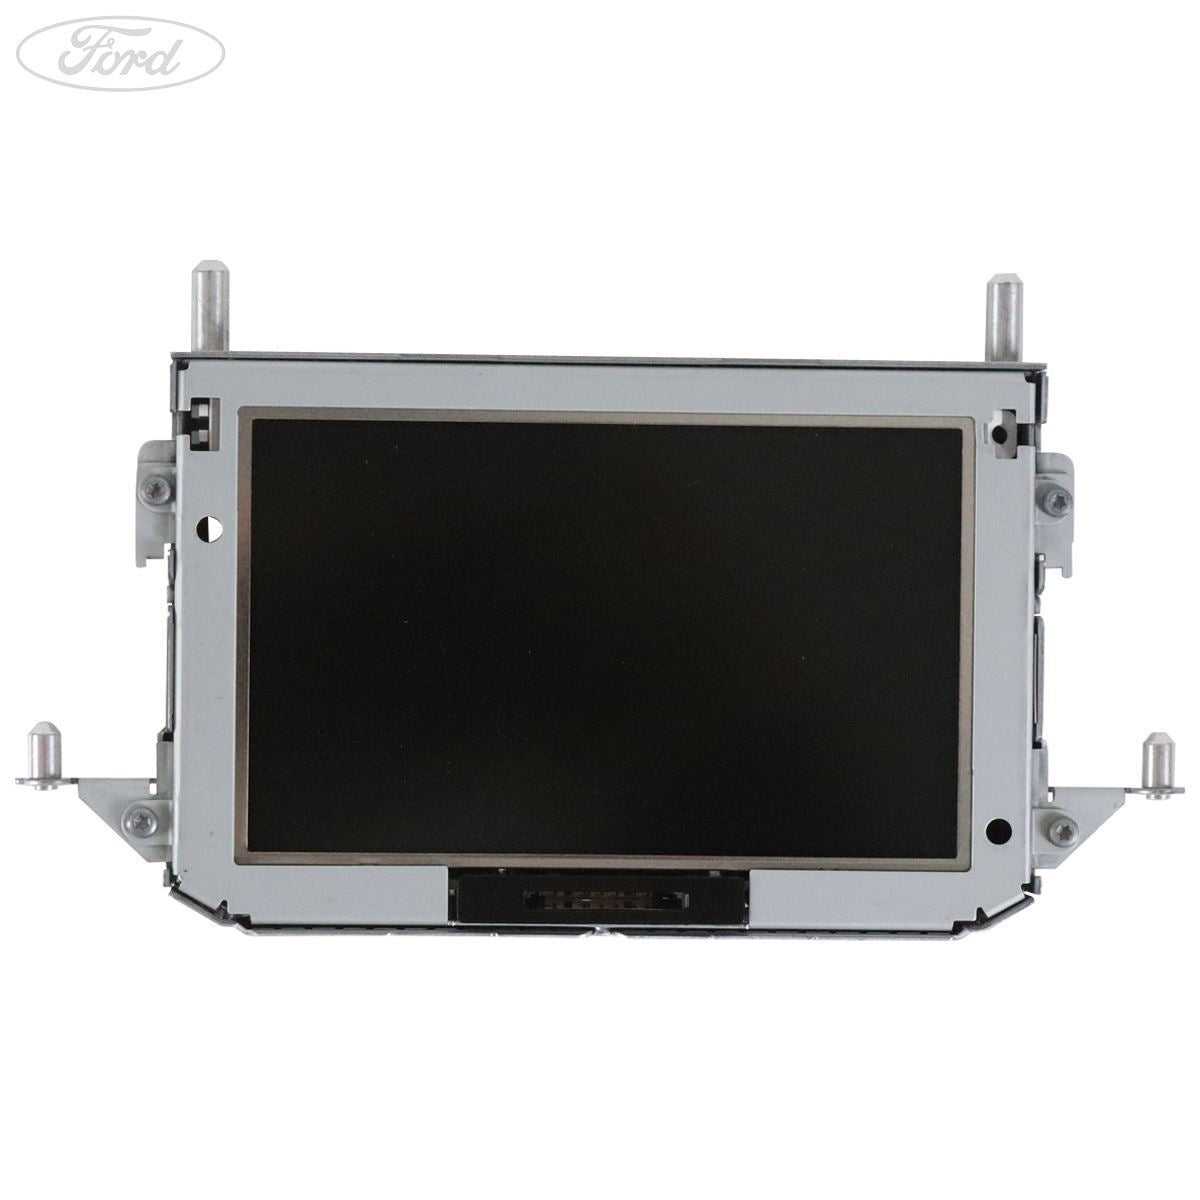 Ford, TRANSIT CUSTOM FRONT CONTROL DISPLAY INTERFACE MODULE UNIT